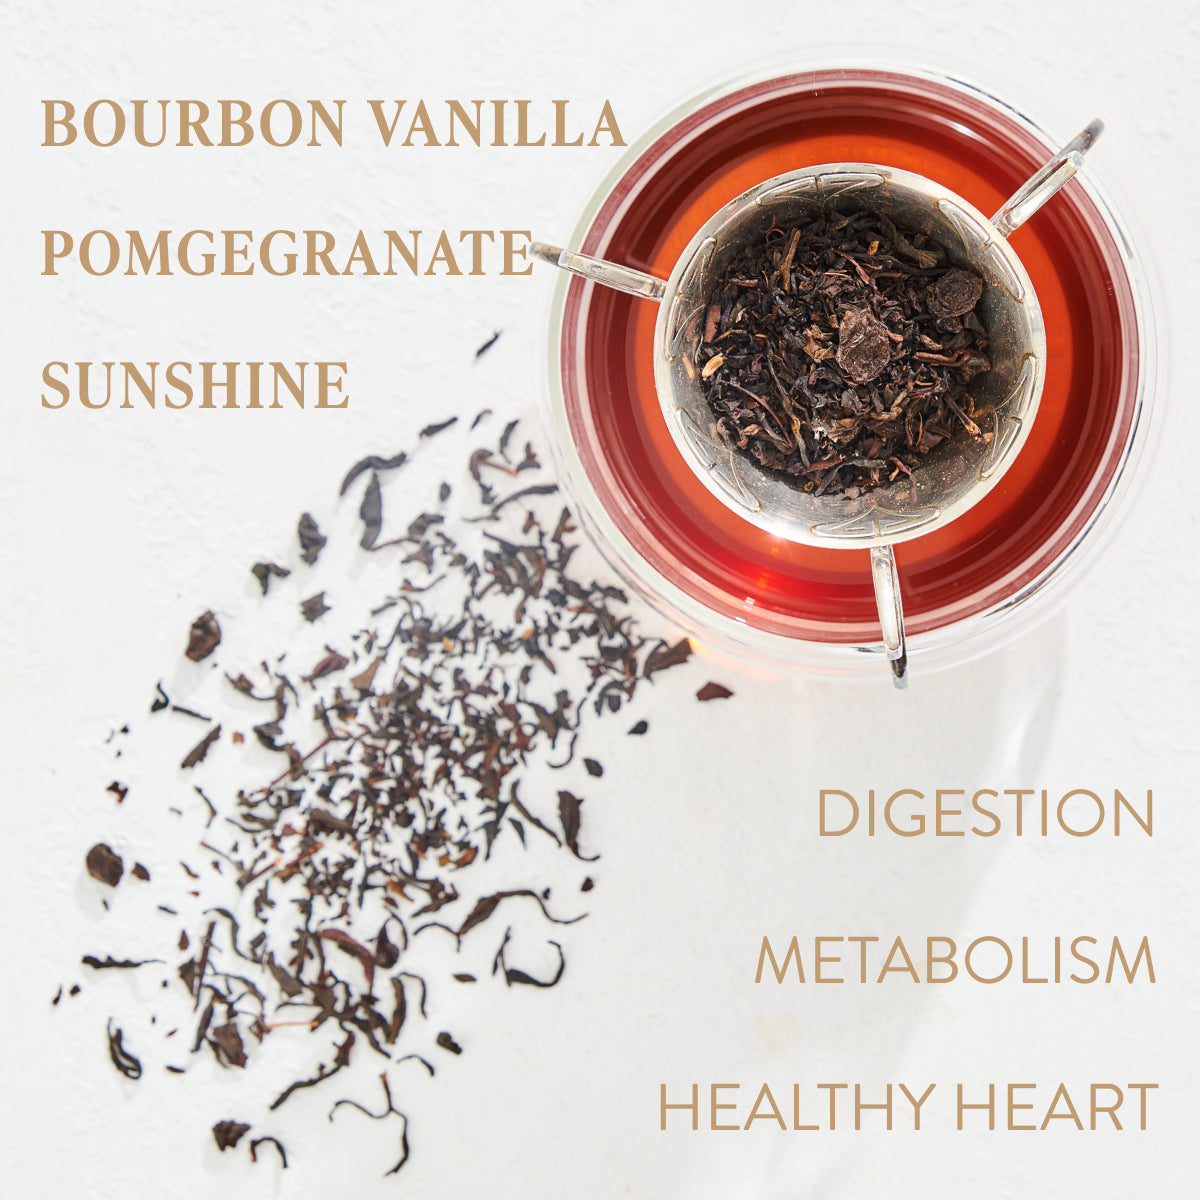 A cup of tea with loose leaves scattered around it. The text reads "Bohemian Breakfast Black Tea- Probiotic Rich Vanilla Puerh Tea for Digestion & Energy." Benefits listed: "Digestion, Metabolism, Healthy Heart." The tea seems to contain bourbon vanilla and pomegranate, making it a delightful coffee alternative with potential health benefits from Magic Hour.